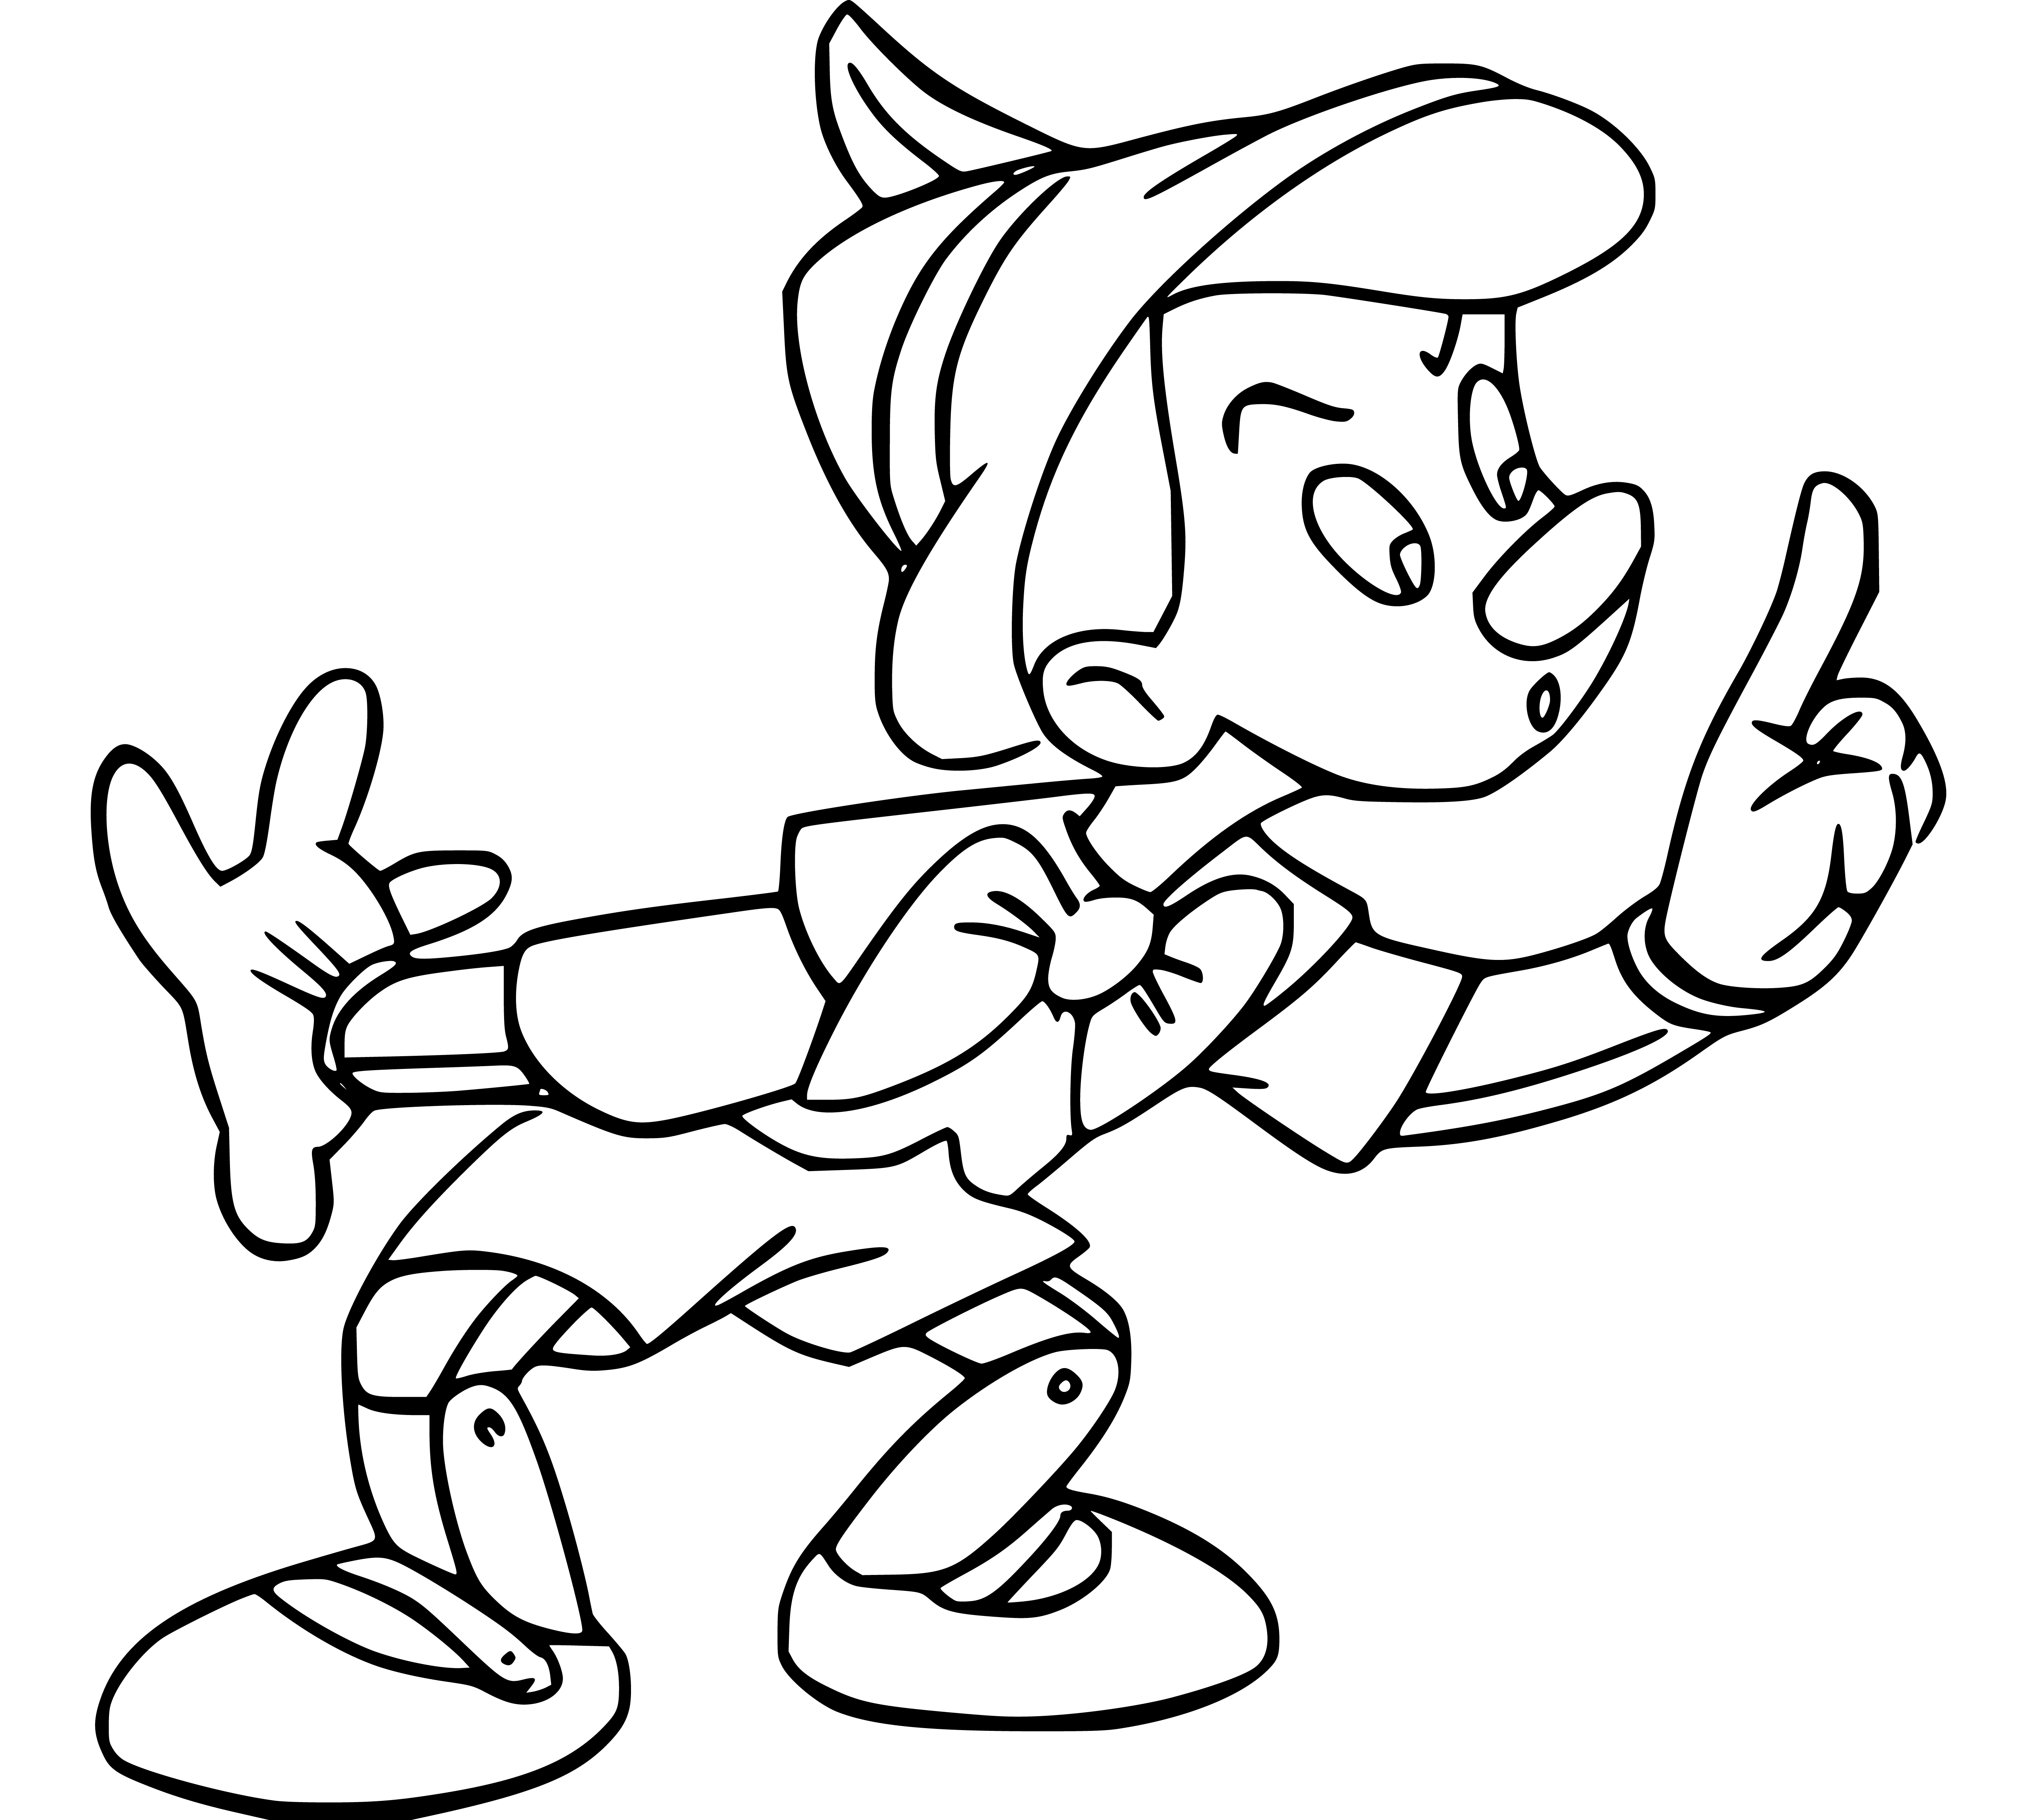 Pinocchio Talking Coloring Page for Kids - SheetalColor.com